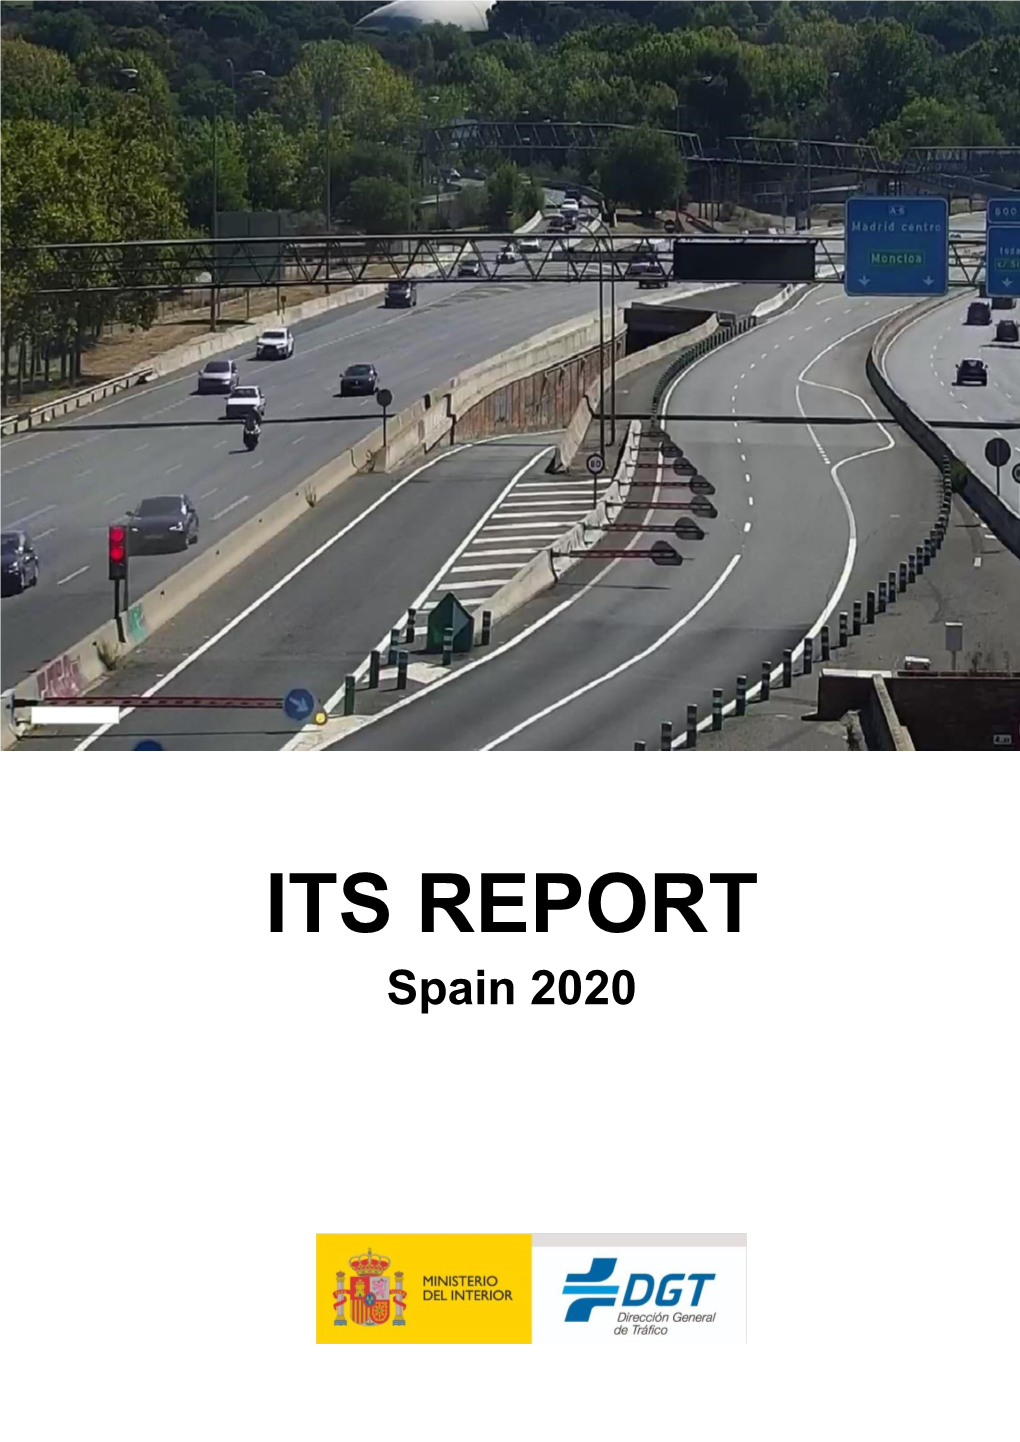 ITS REPORT Spain 2020